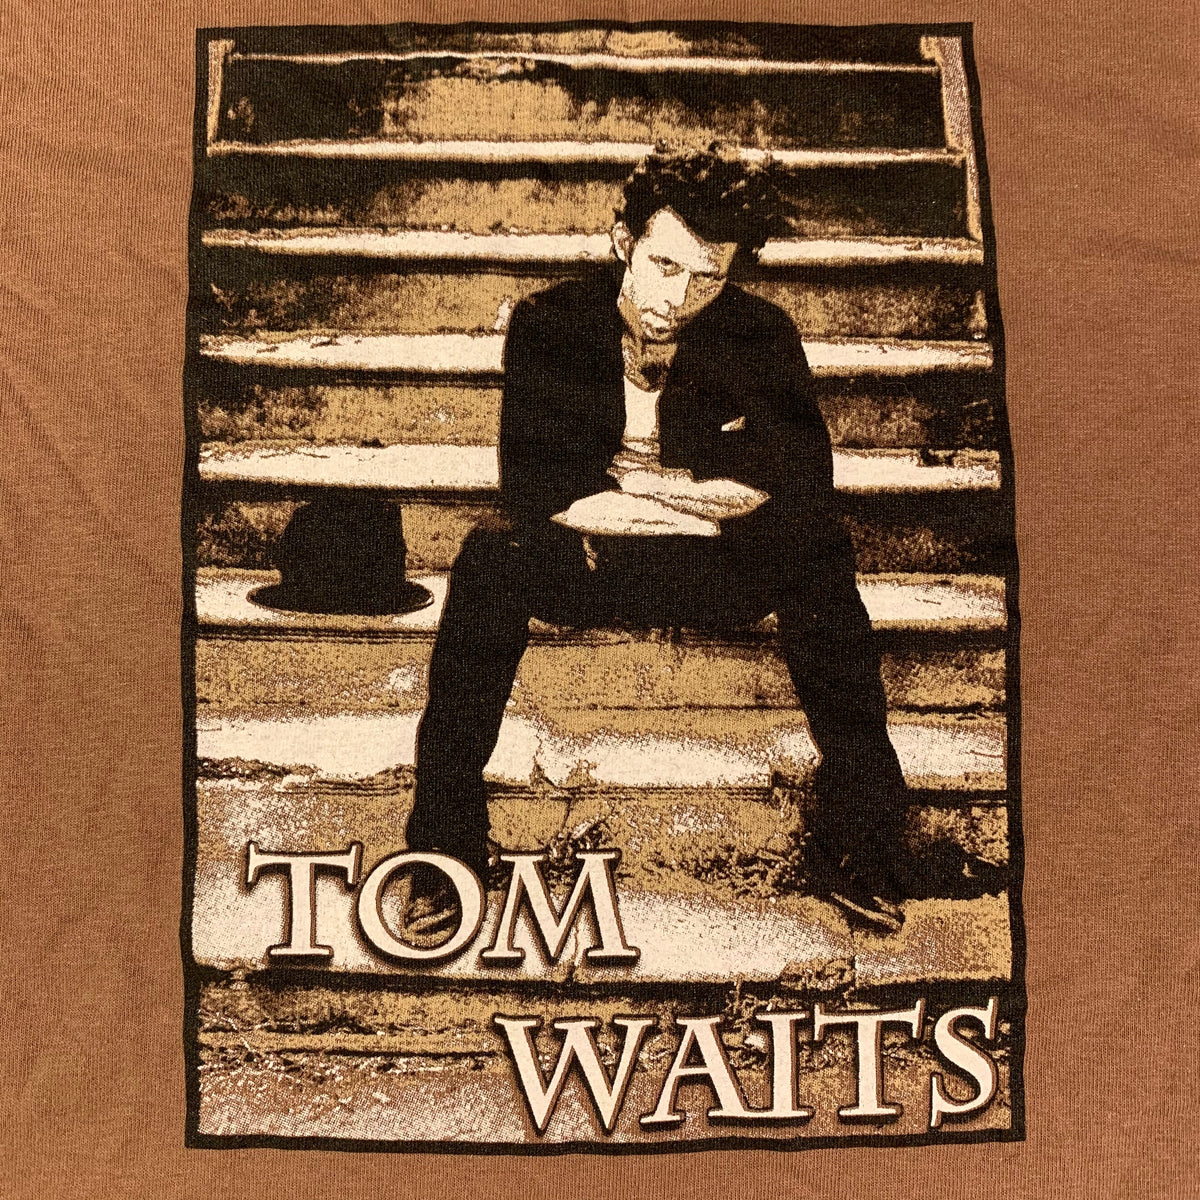 Vintage Tom Waits &quot;Stairs&quot; T-Shirt - jointcustodydc